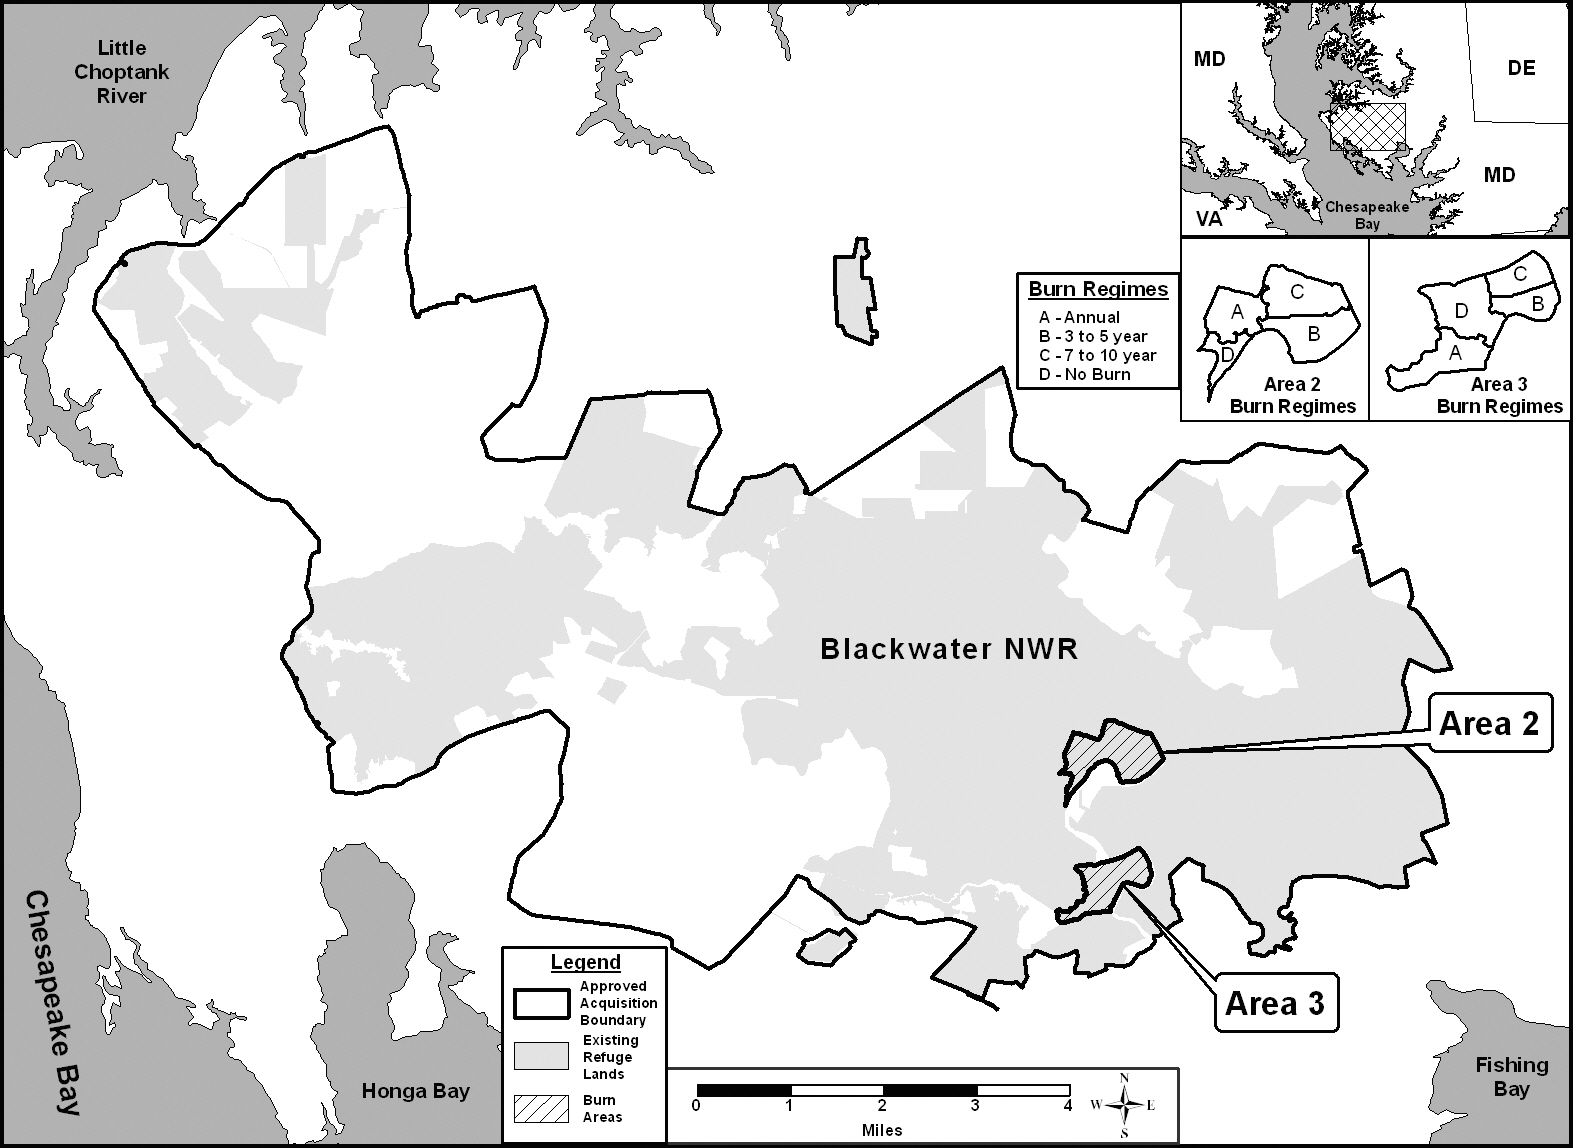 Map of Blackwater National Wildlife Refuge (NWR). Study areas 2 and 3 divided into the different burn regimes including control site (no-burn).